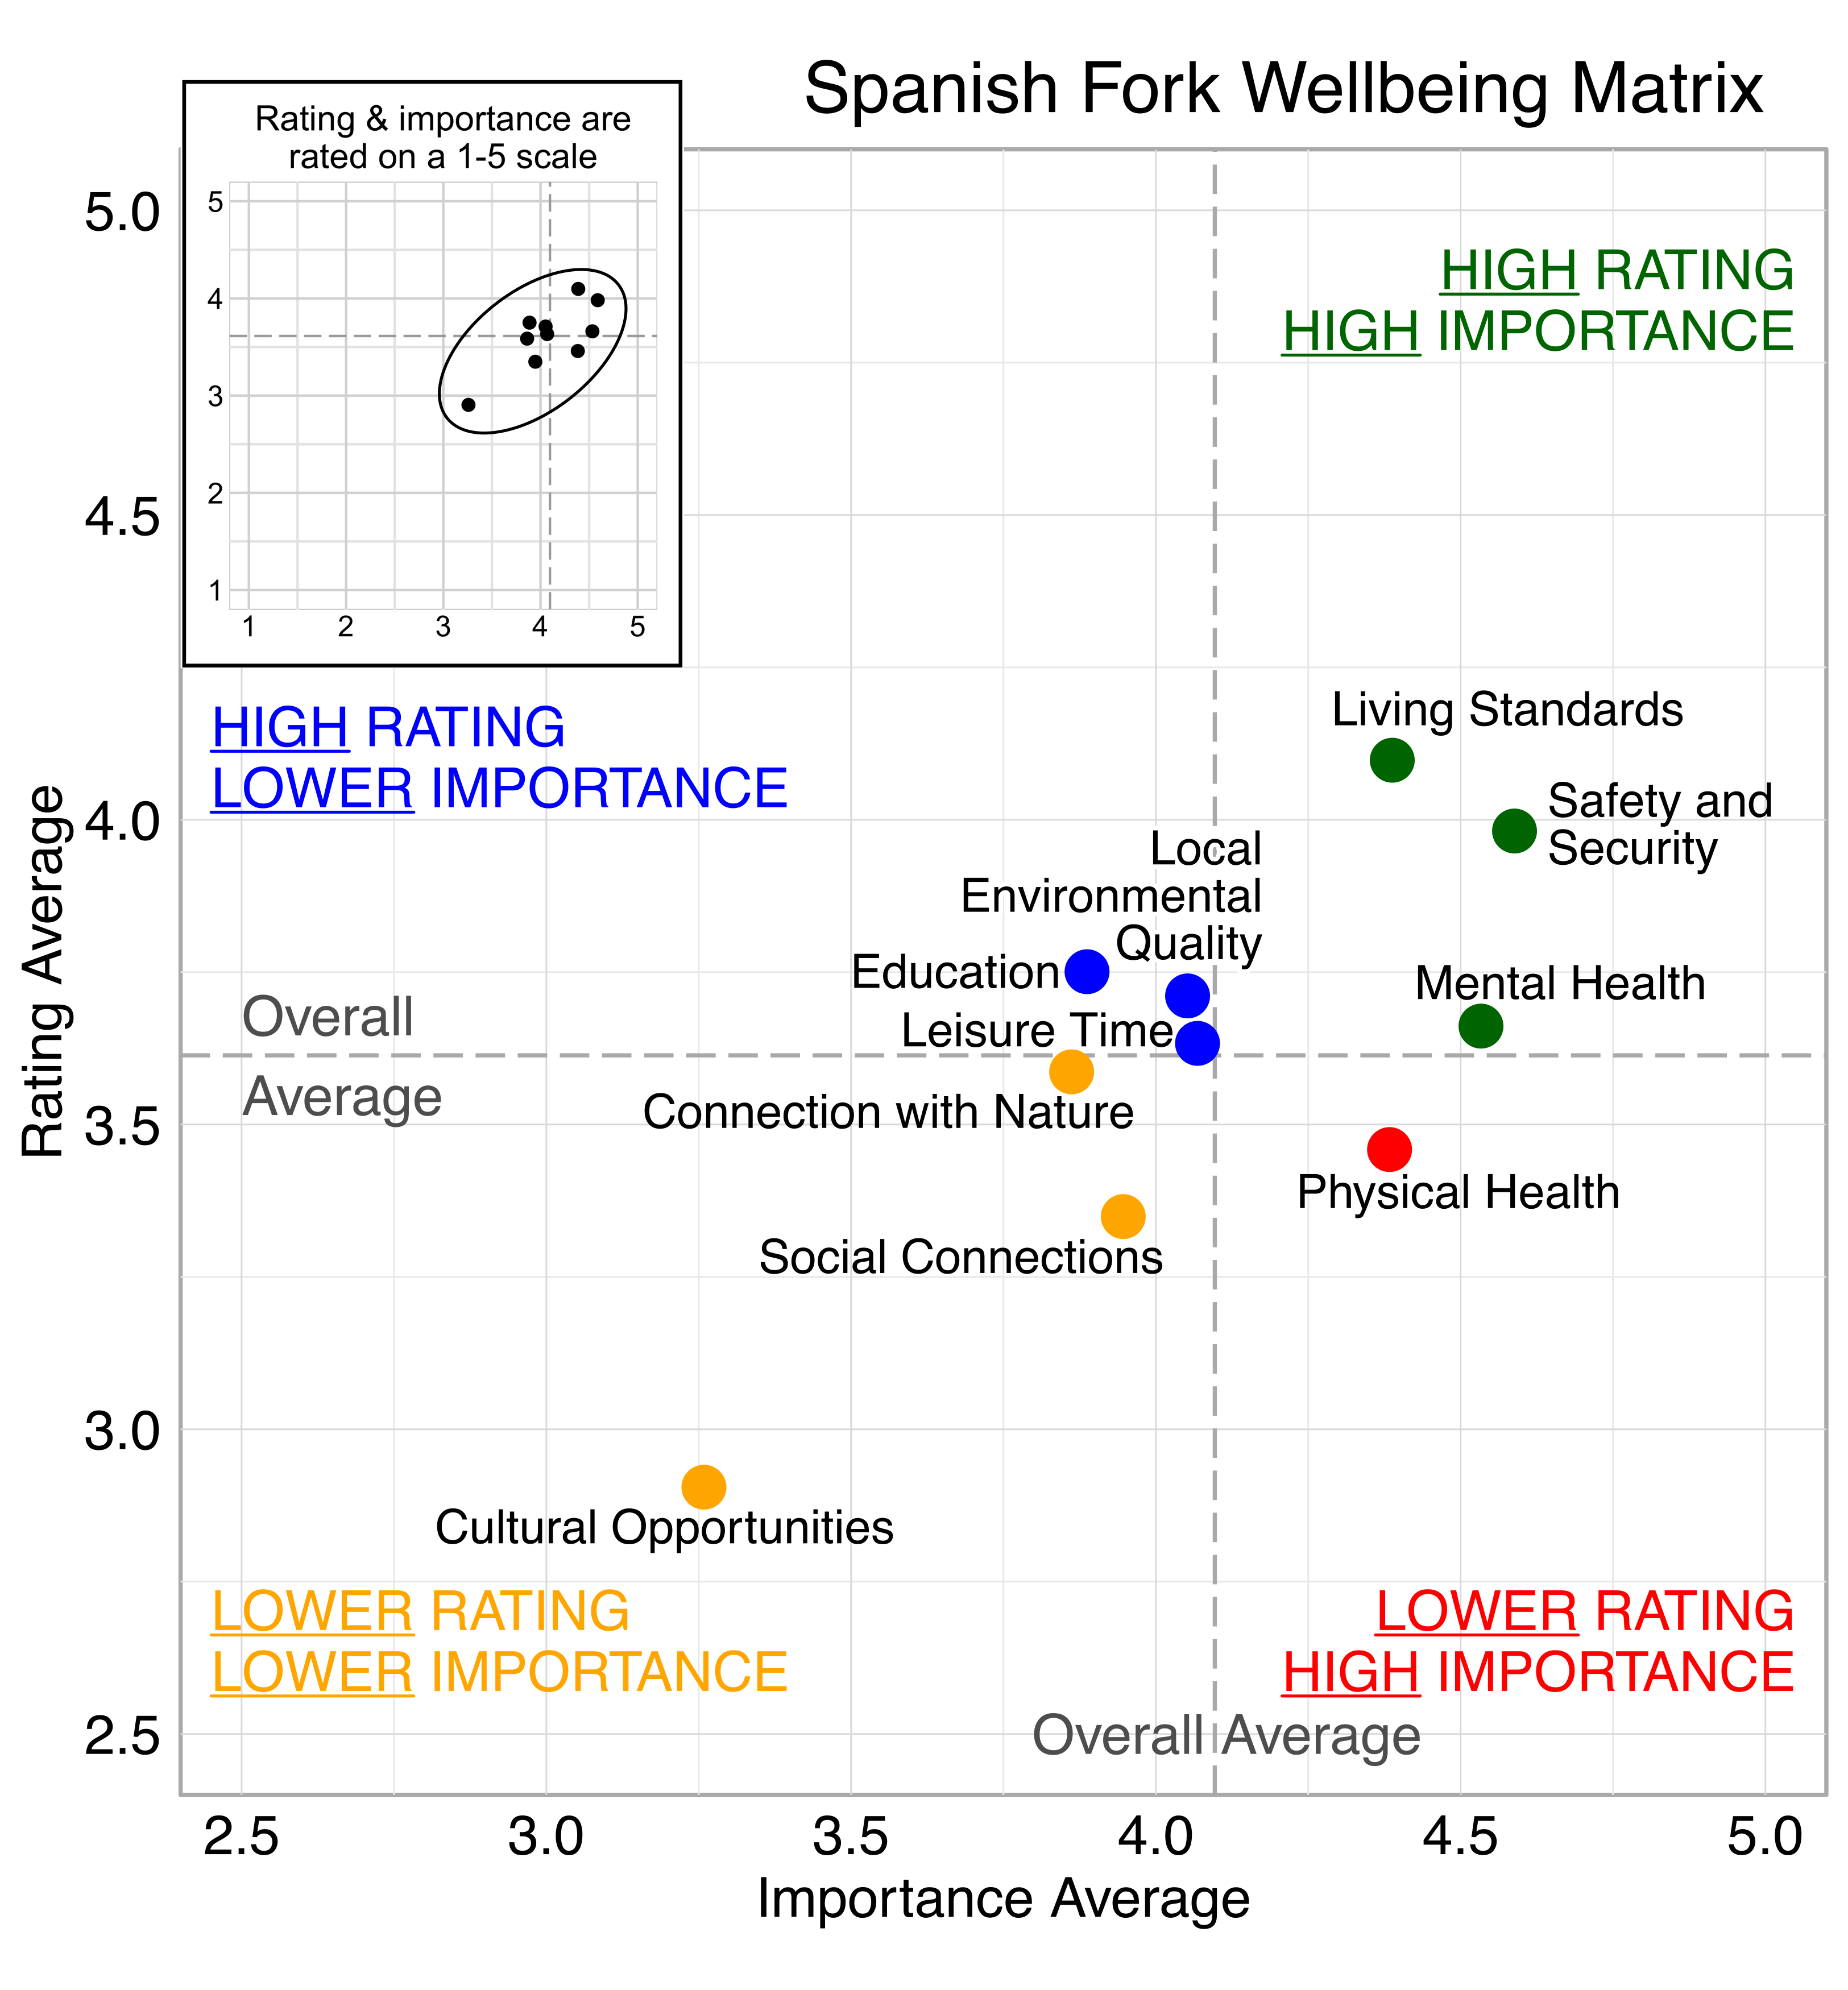 Scatterplot. Title: Spanish ForkWellbeing Matrix. Domains are classified into four quadrants depending on their average rating and average importance as compared to the average of all the average domain ratings and the average of all the average domain importance ratings. High rating, high importance (green quadrant) domains include: Living Standards, Safety and Security, Mental Health. High rating, lower Importance (blue quadrant) domains include:  Local Environmental Quality, Education, Leisure Time. Lower rating, lower importance (yellow quadrant) domains include: Connection with Nature, Social Connections, Cultural Opportunities. Lower rating, high importance (red quadrant) domains include: Physical Health. 